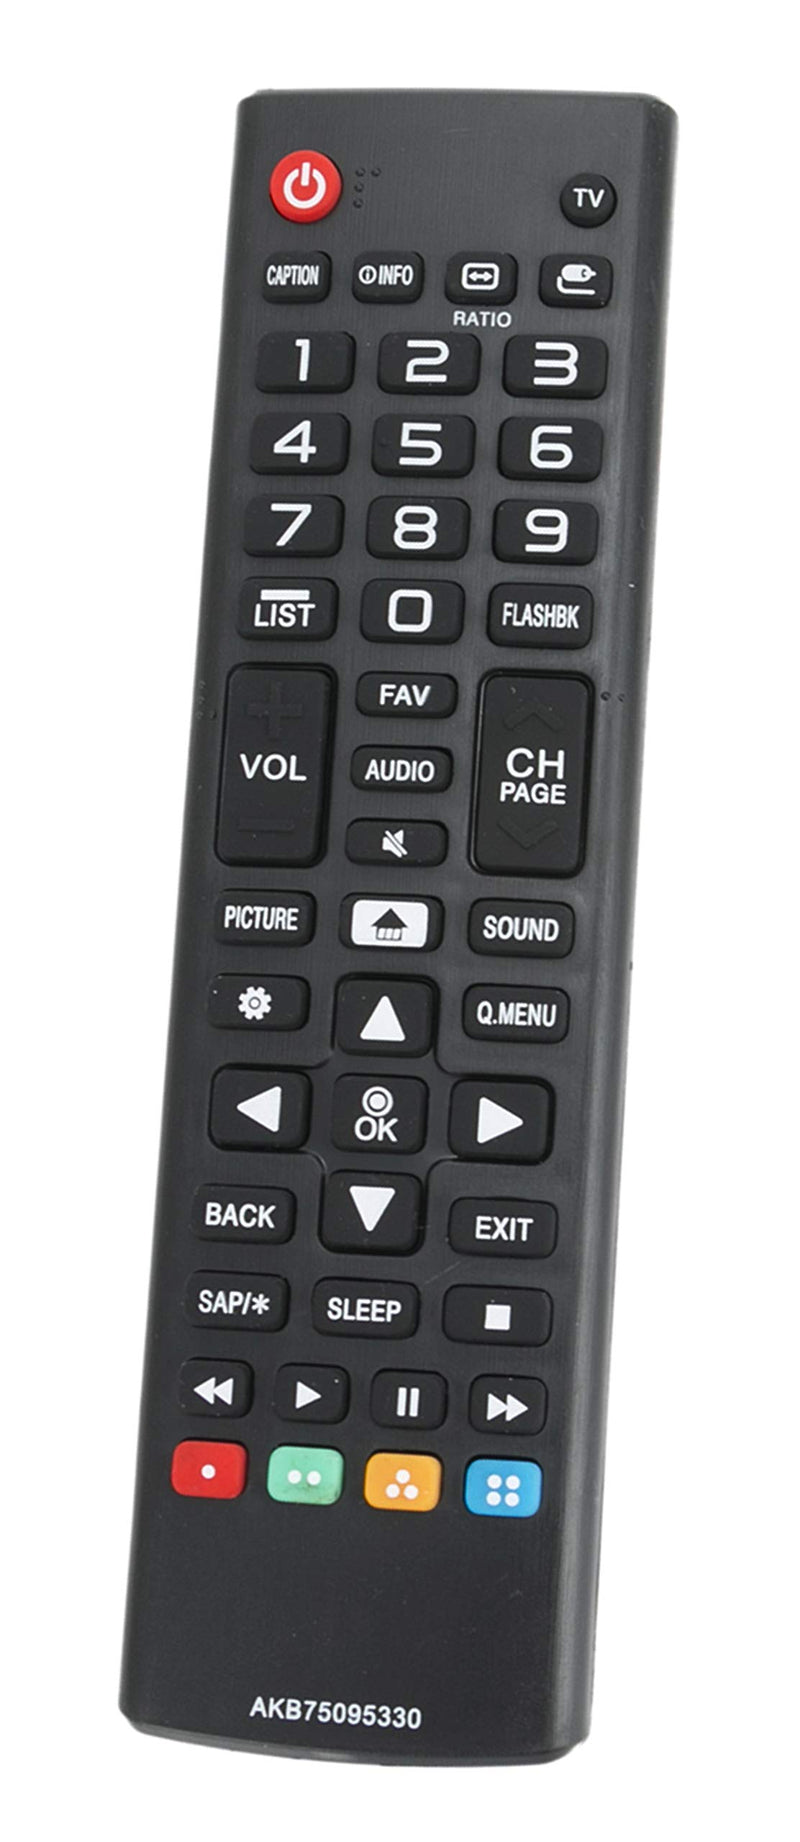 New AKB75095330 Replace Remote Control fit for LG 28MT42DF 28LJ400B 43LJ5000 43LJ500M 32LJ500B 28LJ400B-PU 32LJ500UB 32LJ500-UBLED 28LJ430B 28LJ400B-PU 32LJ500B-UB 43LJ5000-UB 43LJ500M-UB LCD TV - LeoForward Australia